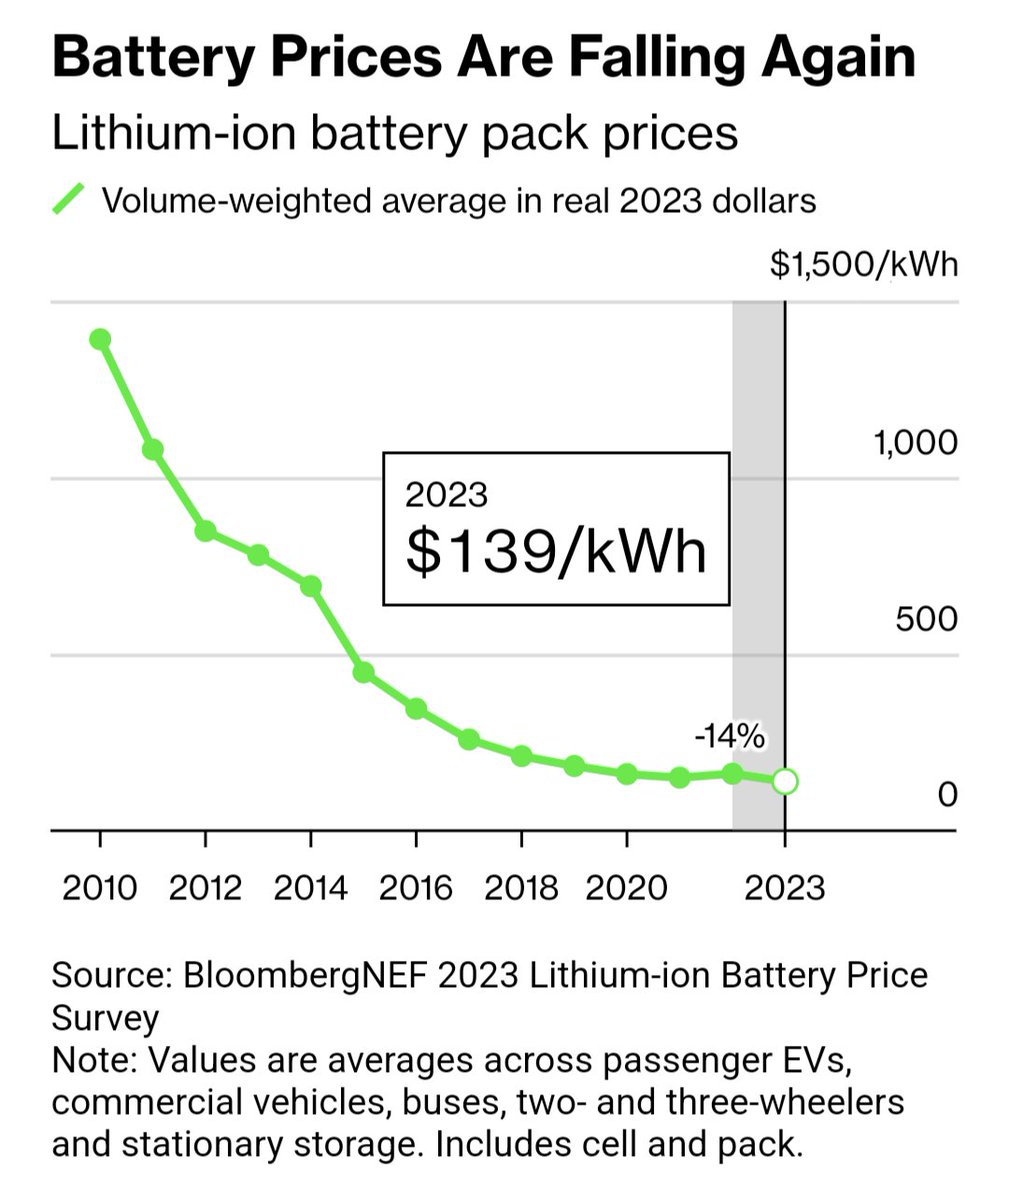 After a brief rise in 2022, inflation-adjusted Lithium-ion battery prices are falling again, according to the latest battery analysis from BloombergNEF led by @EvelinaStoikou. Pack costs fell 14% this year (largest annual decline since 2018) to $139/kWh. bloomberg.com/news/articles/…